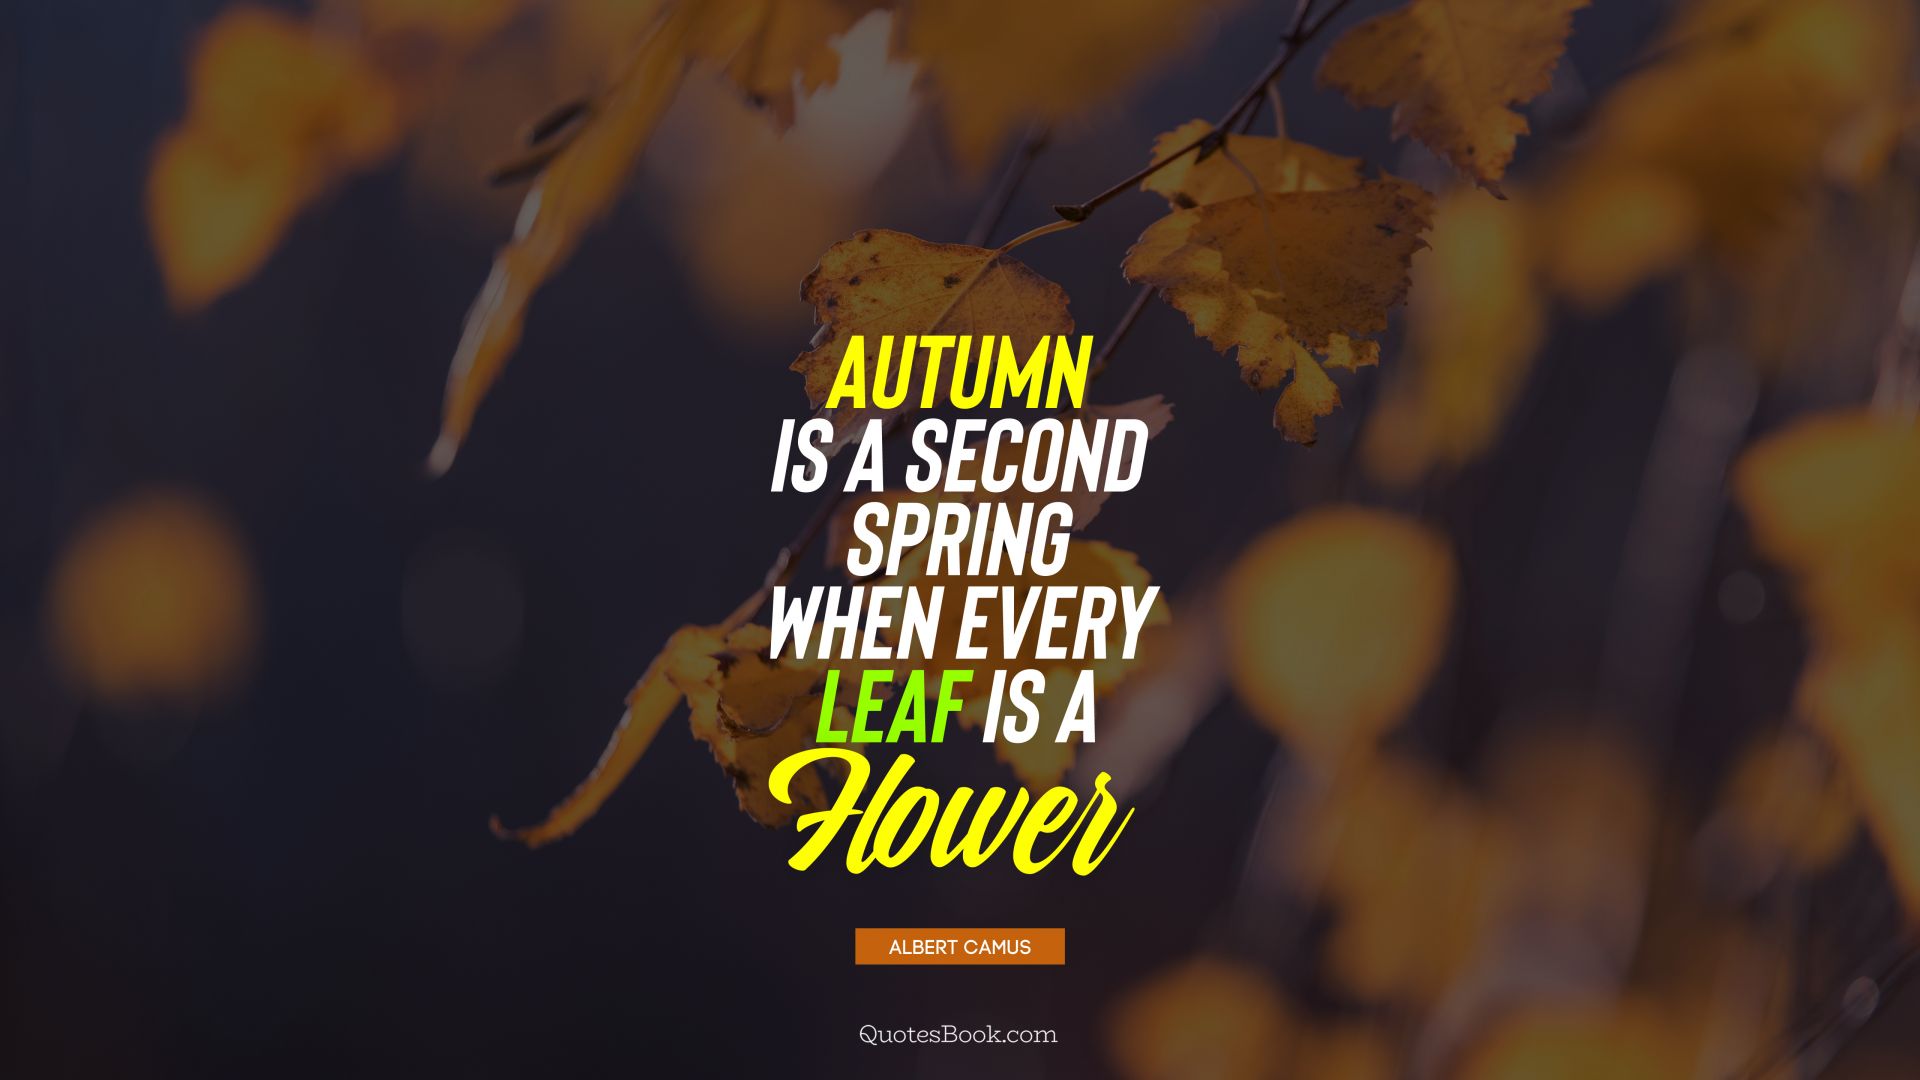 Autumn is a second spring when every leaf is a flower. - Quote by Albert Camus